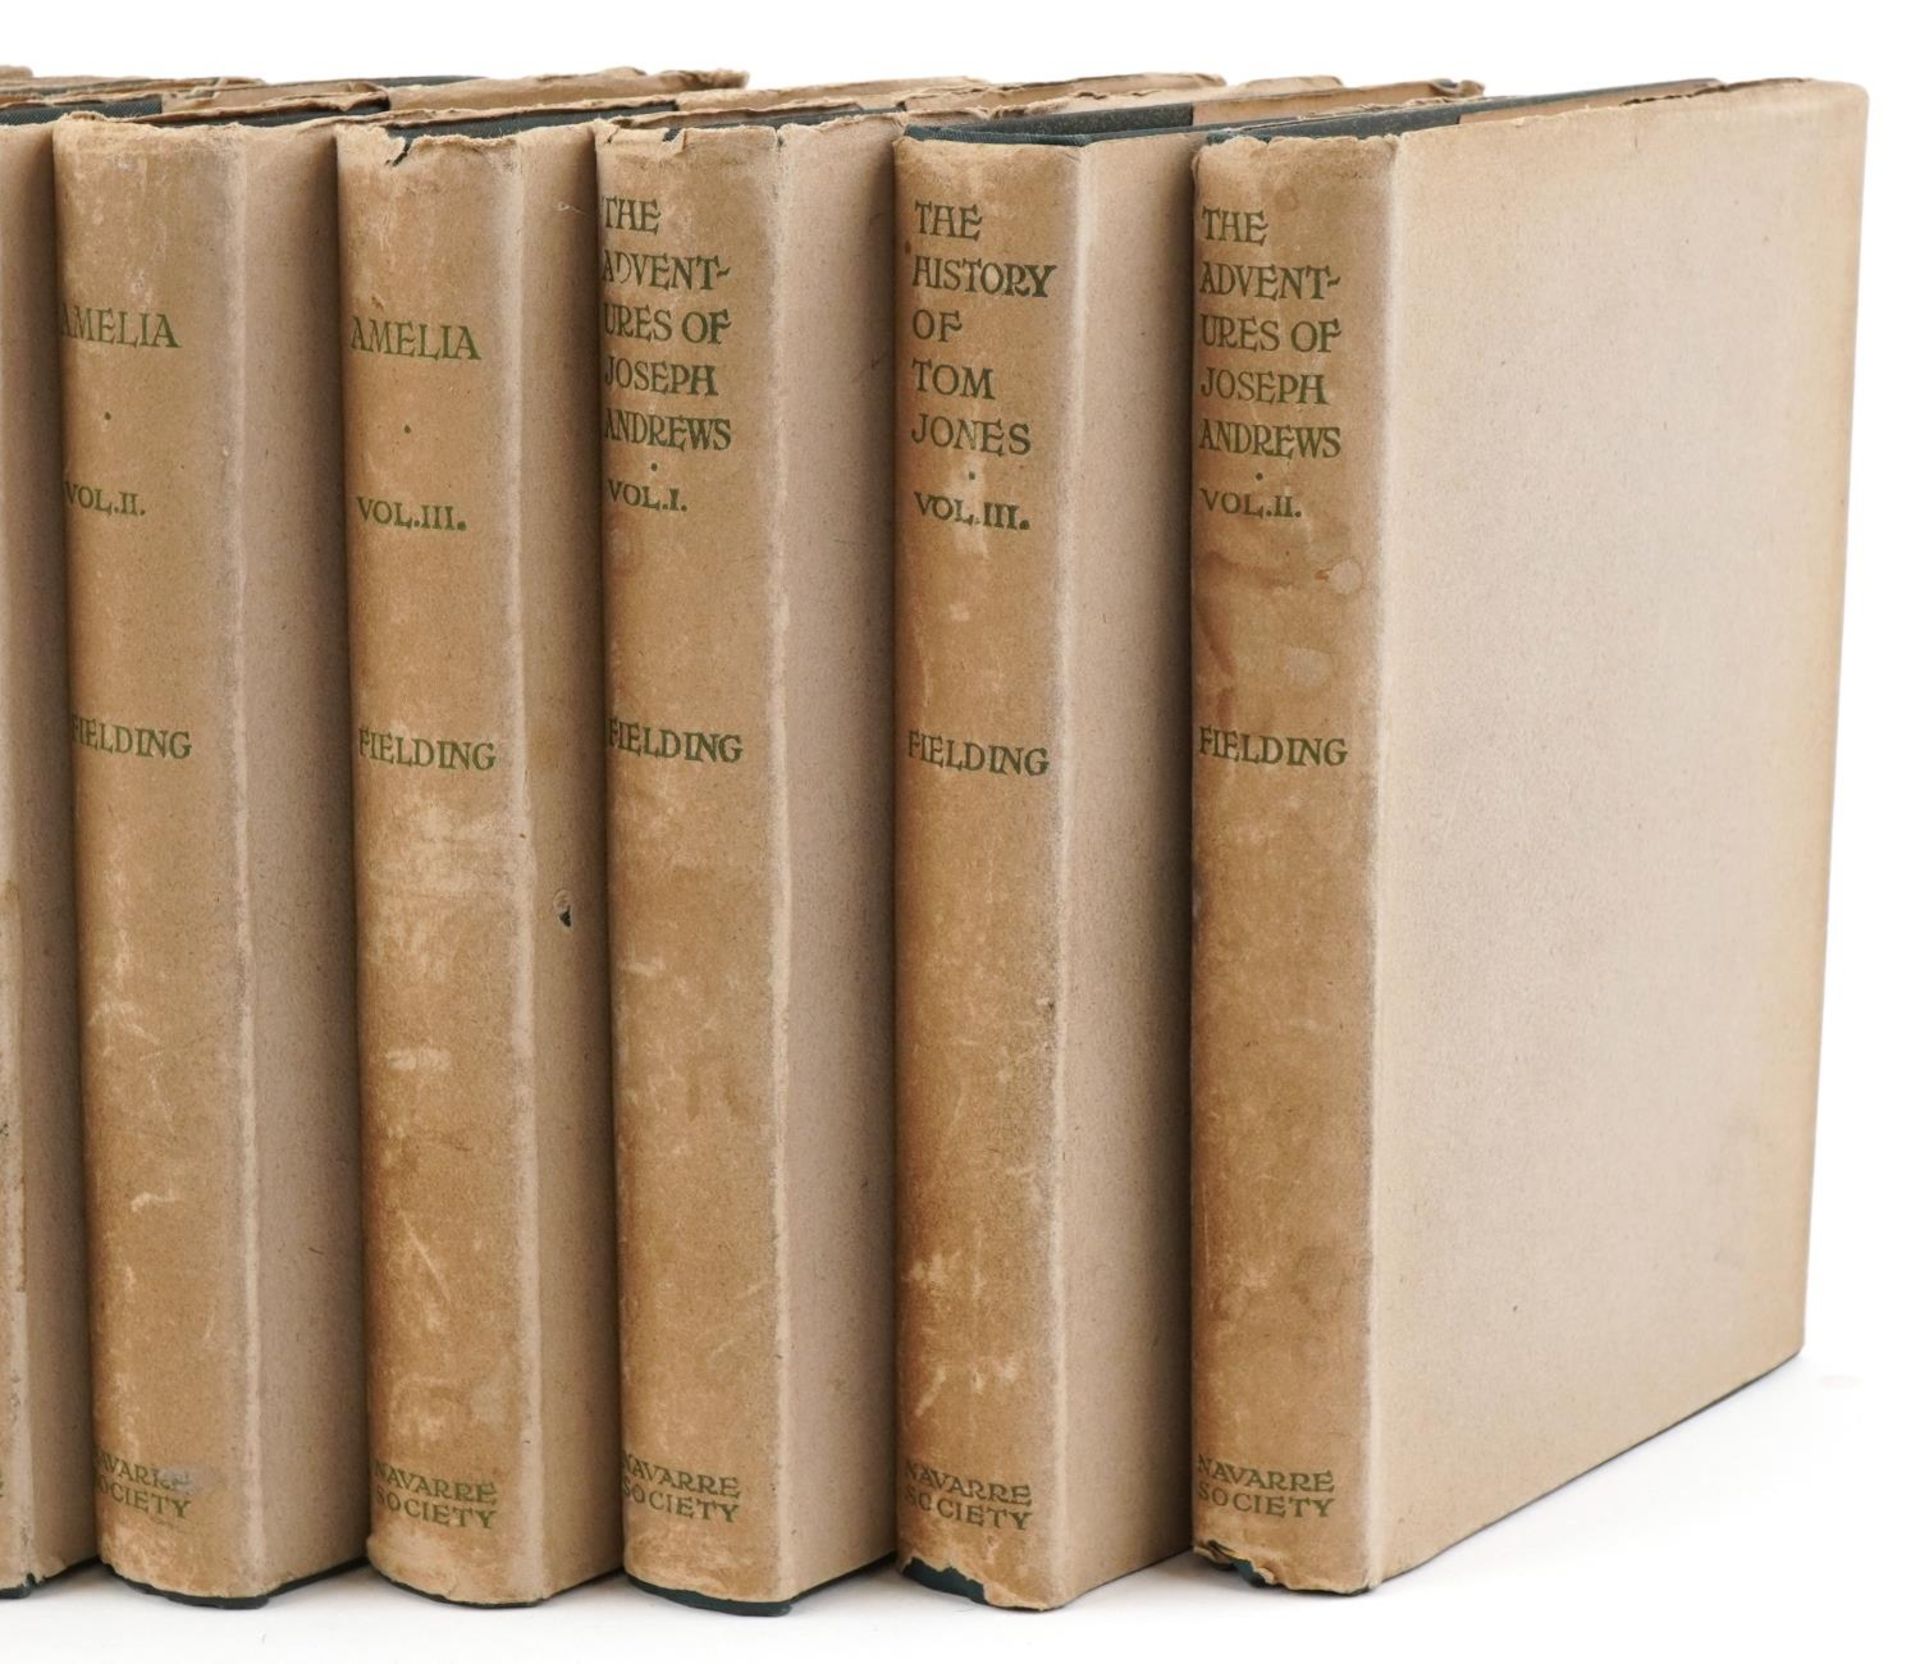 The Works of Henry Fielding, set of twelve Navarre Society hardback books with dust jackets - Image 6 of 10